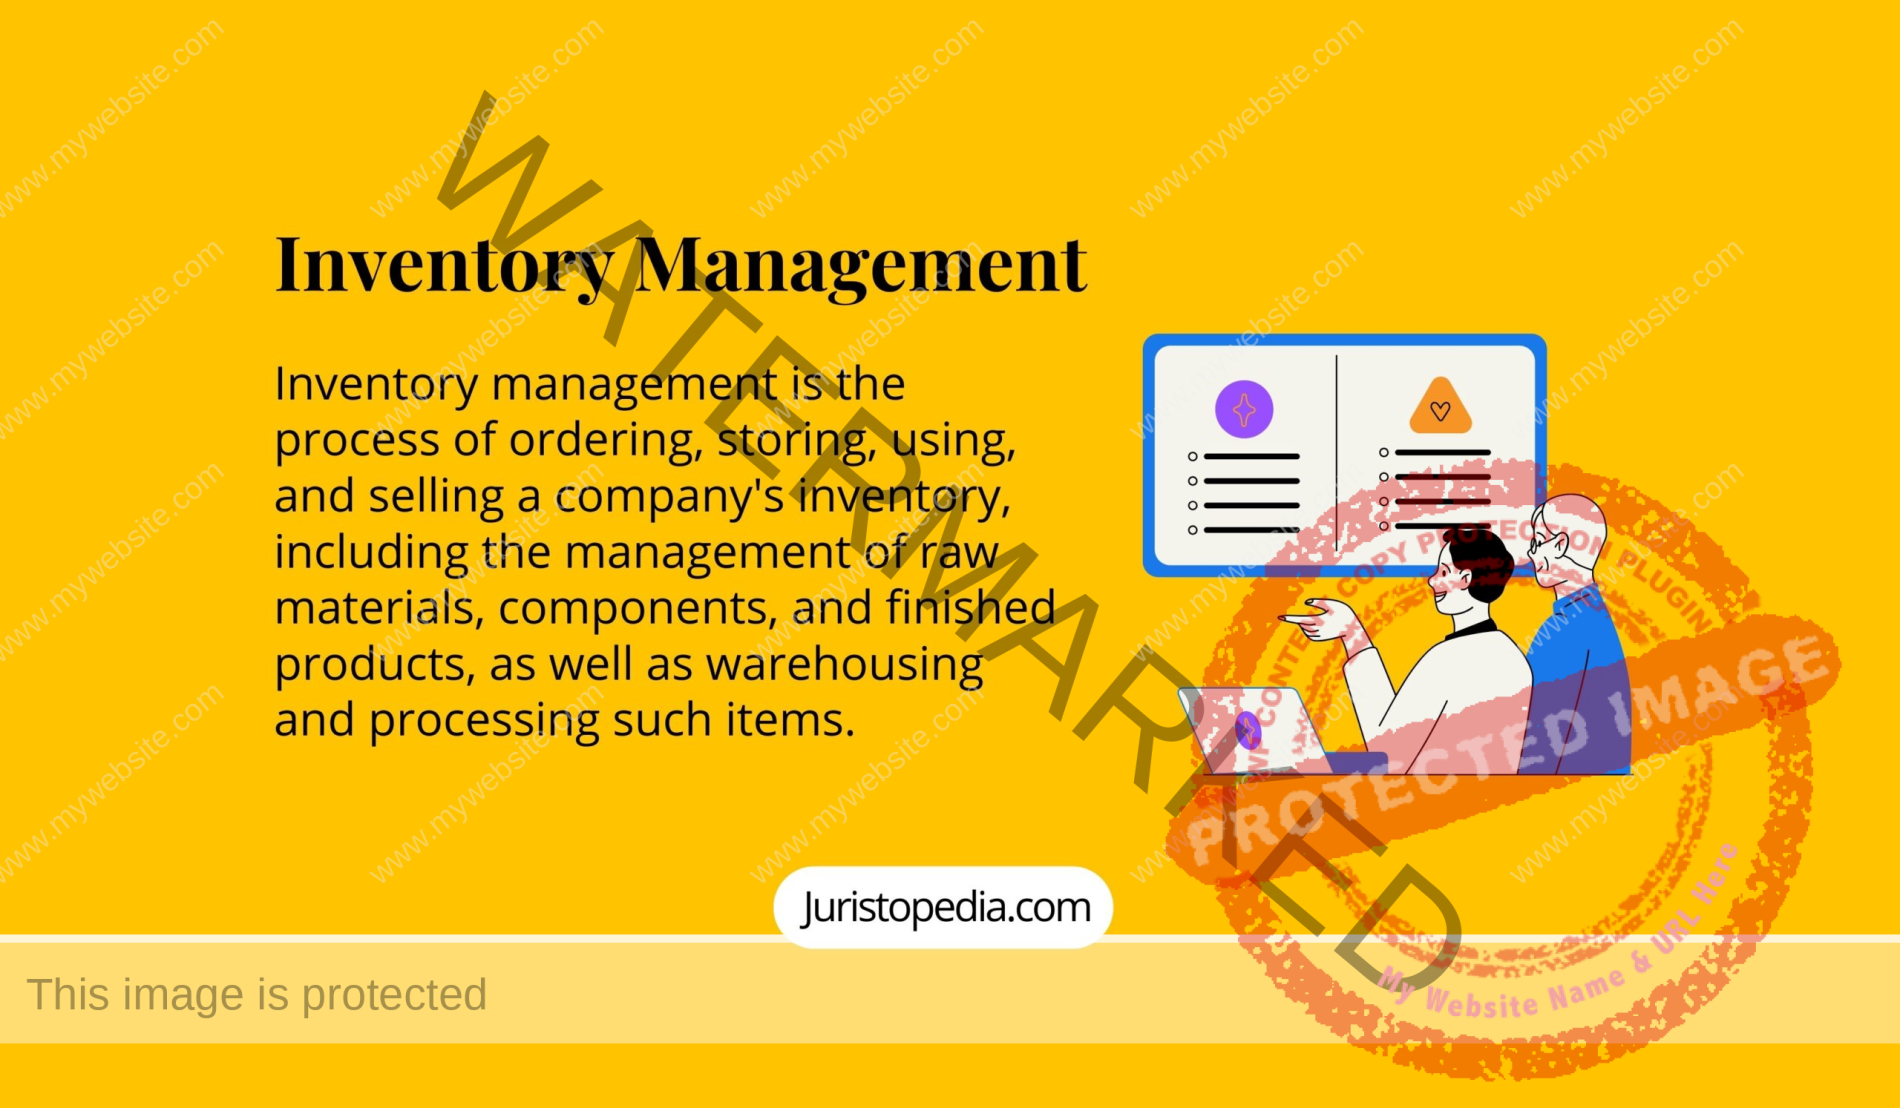 Inventory Management - stock in trade - arrangement of stocks - raw materials - product management